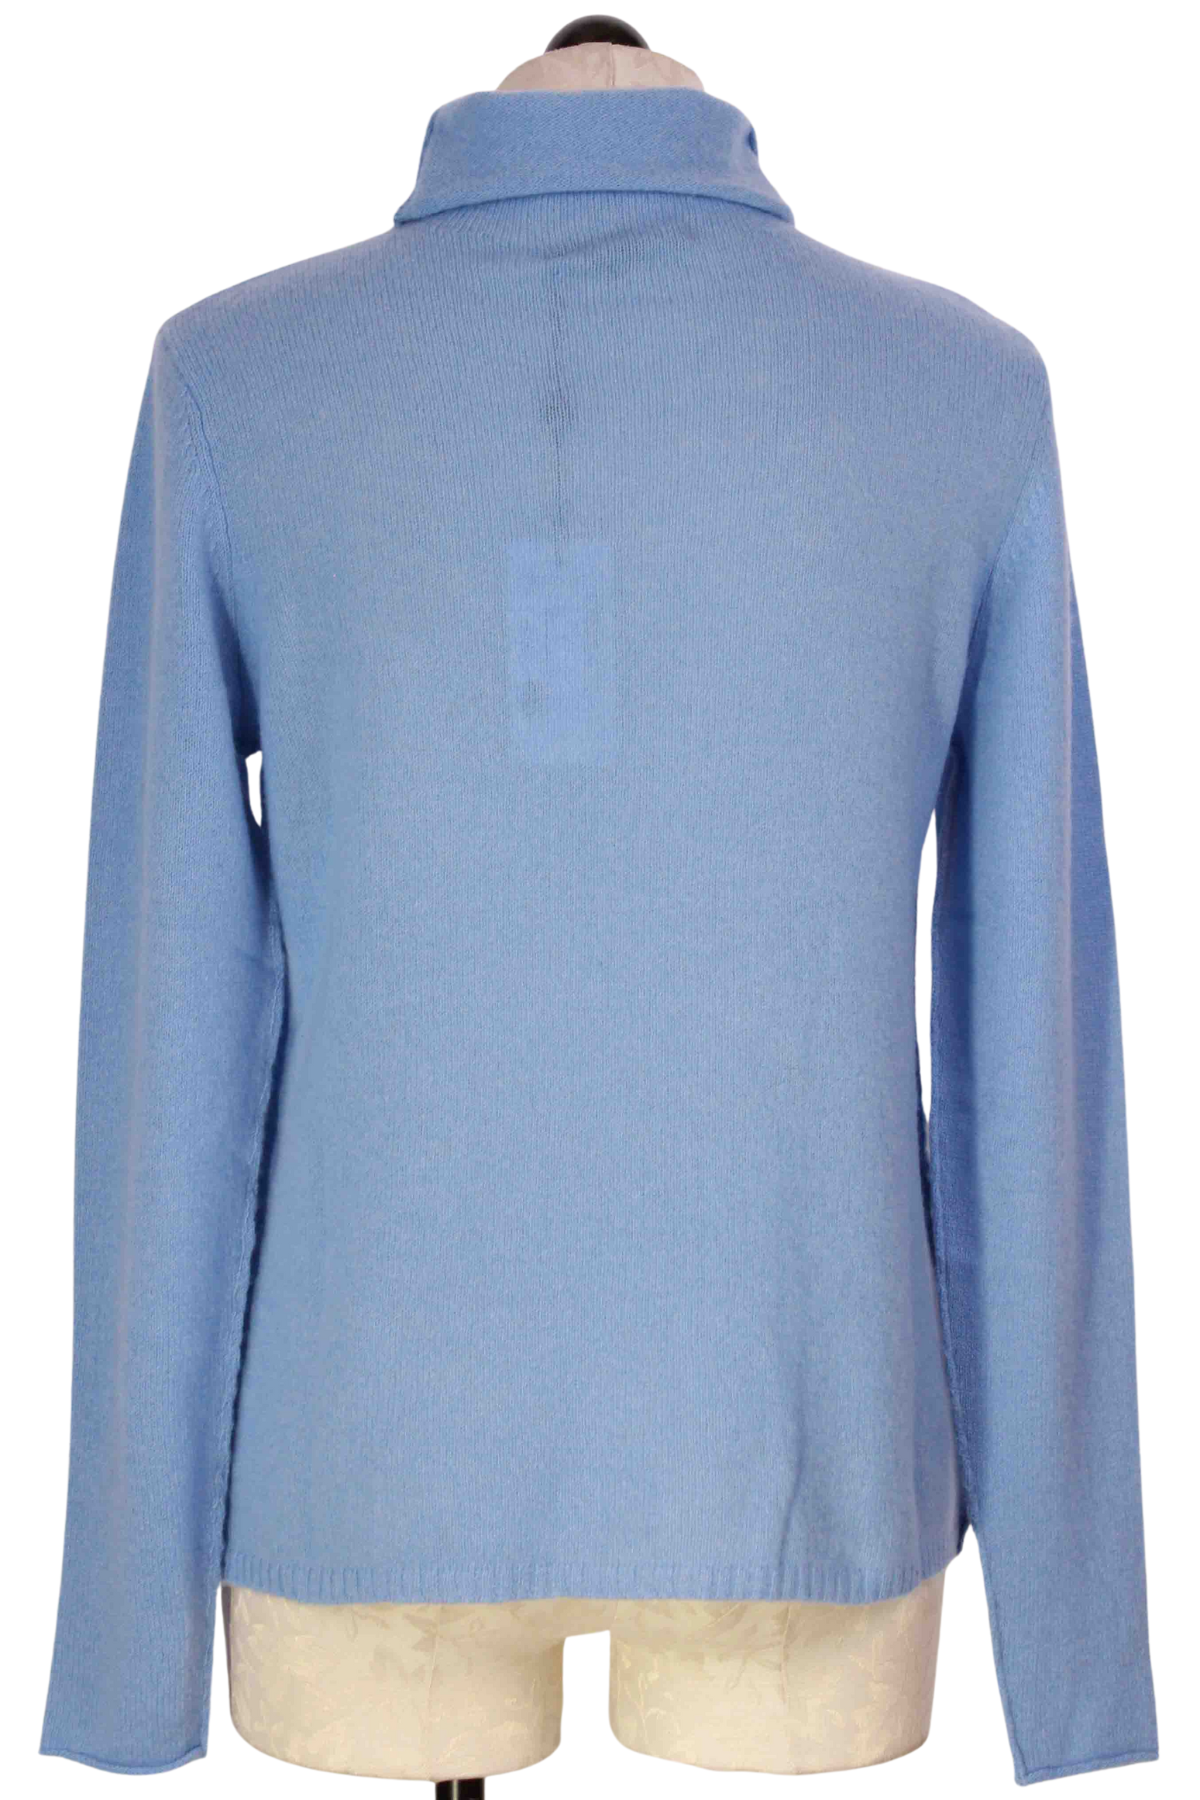 back view of Chapel Hill Blue Harper Lightweight Sweater by Alashan Cashmere